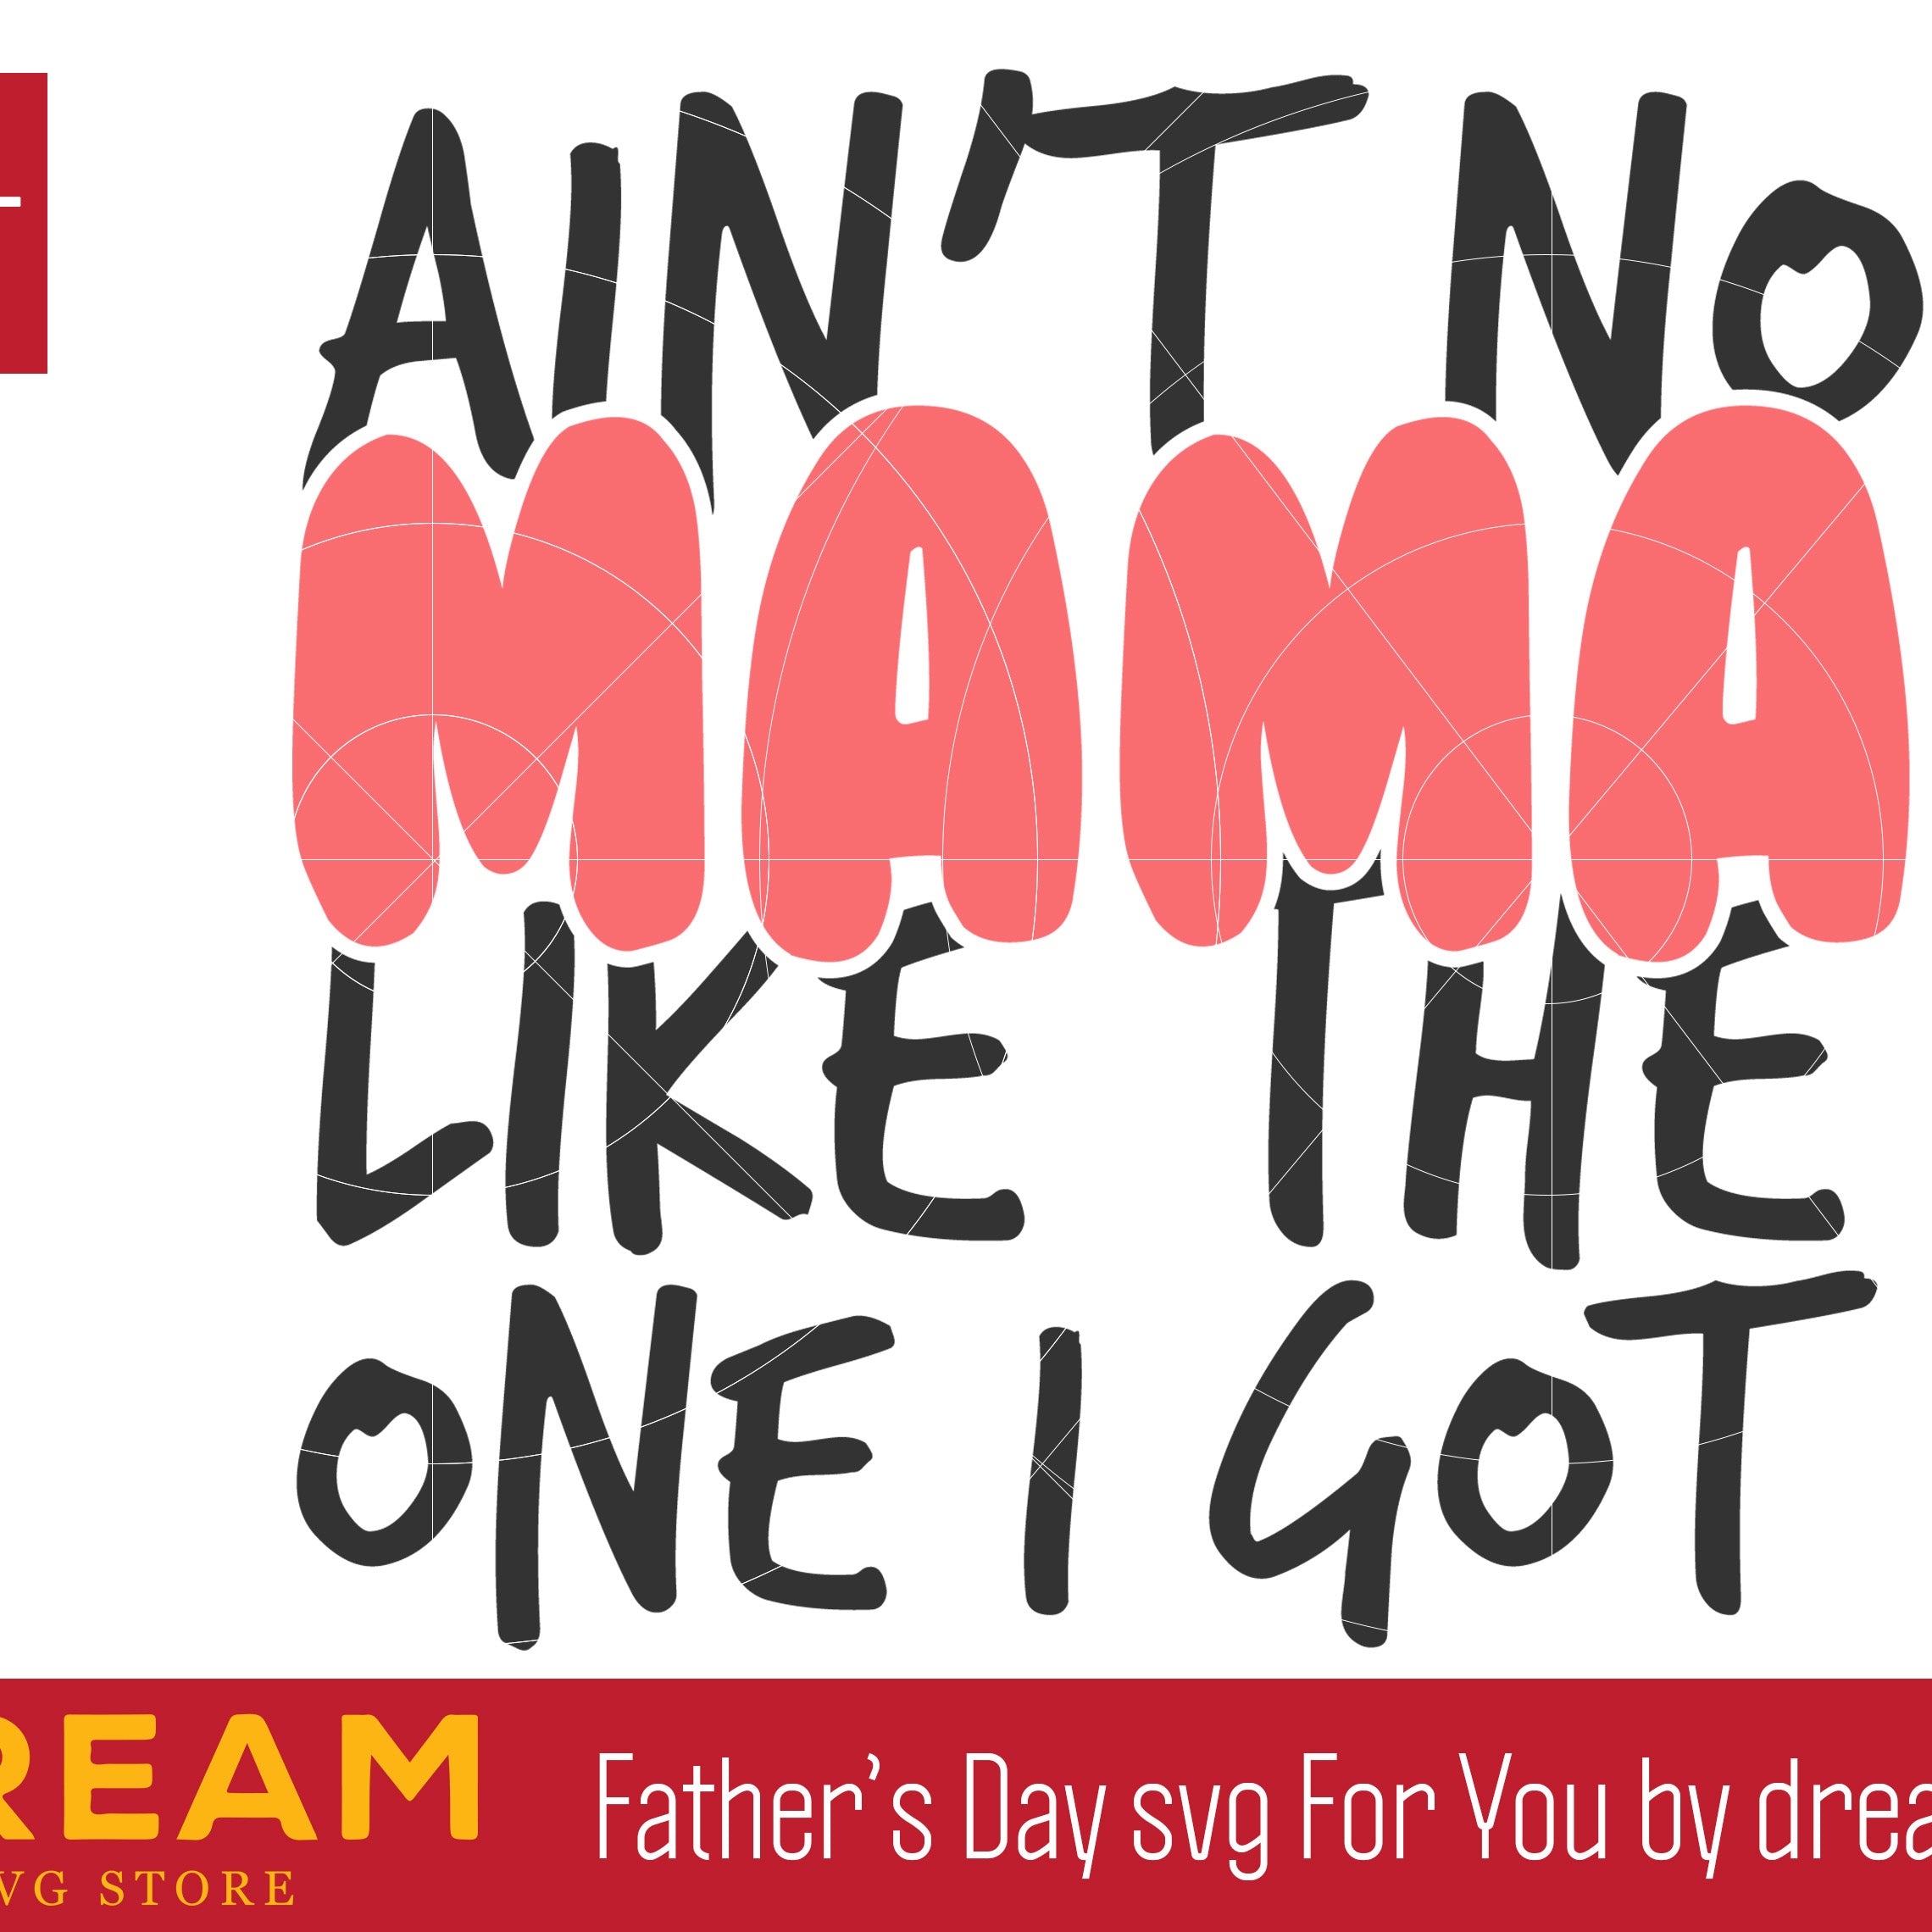 Aint no mama like the one i got svg, Mother's day svg, eps, png, dxf